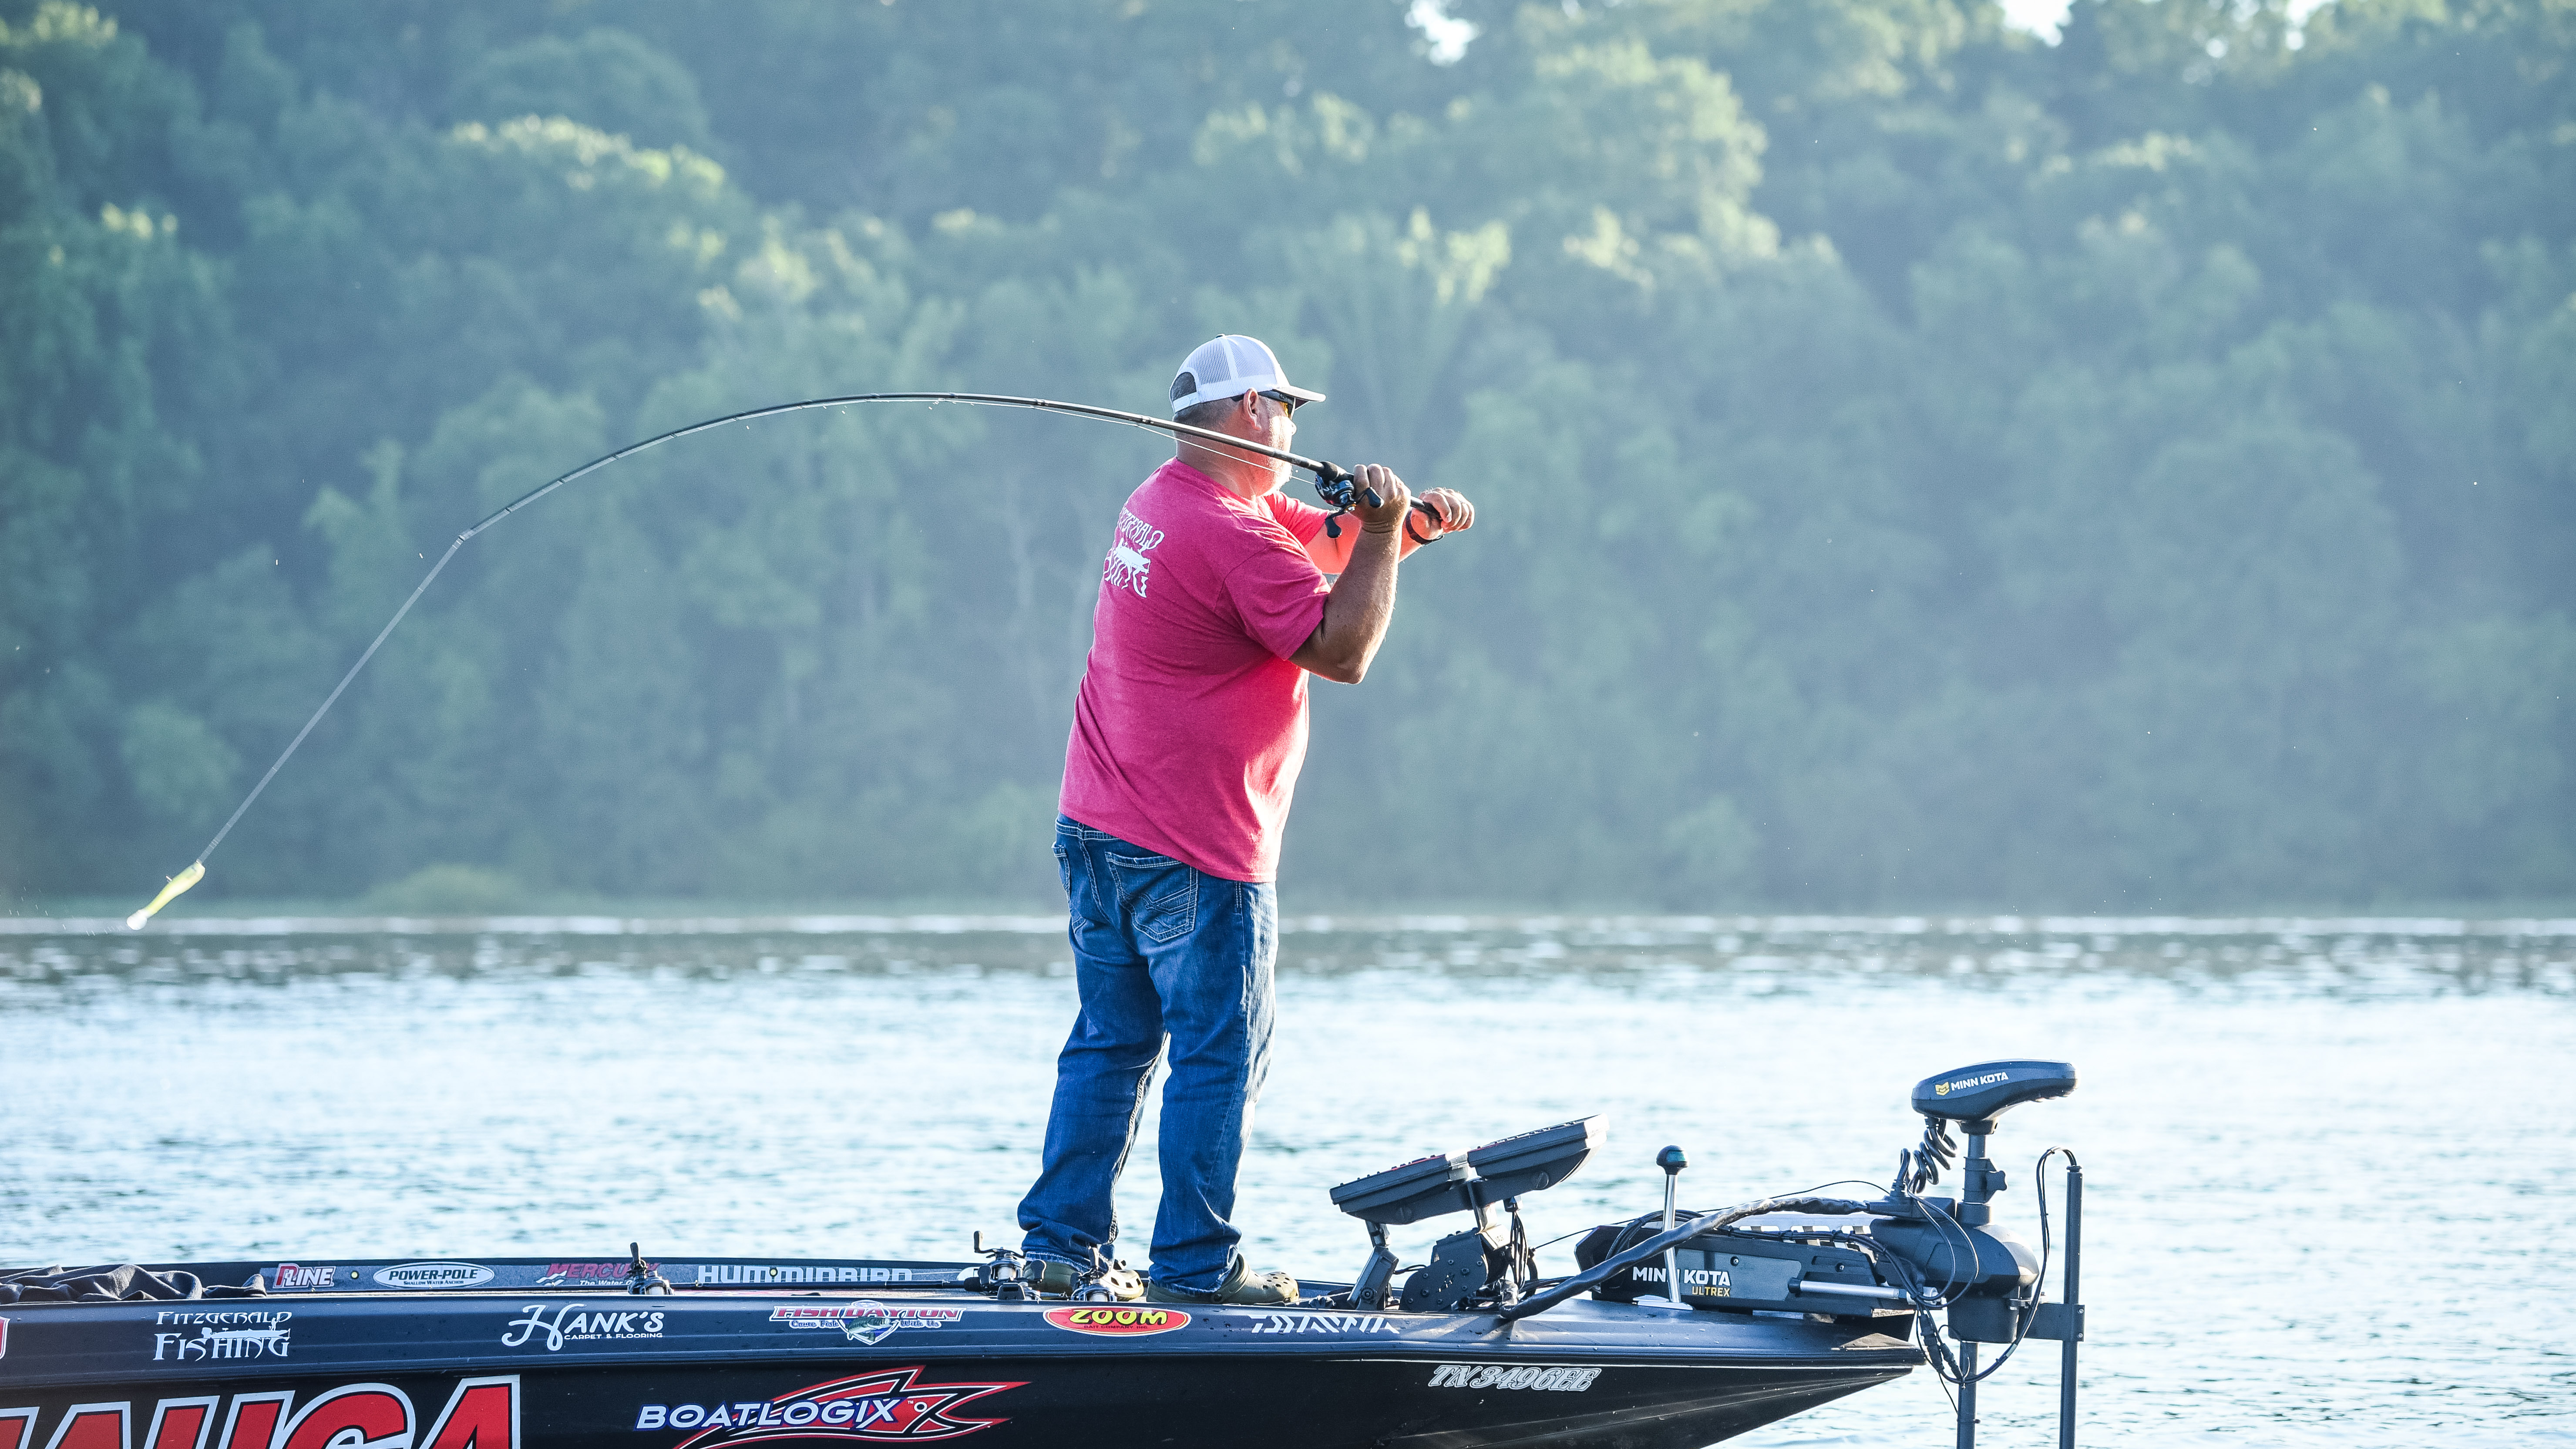 Lake Fork Ring Fry: You Need This Bait On Your Boat Deck 